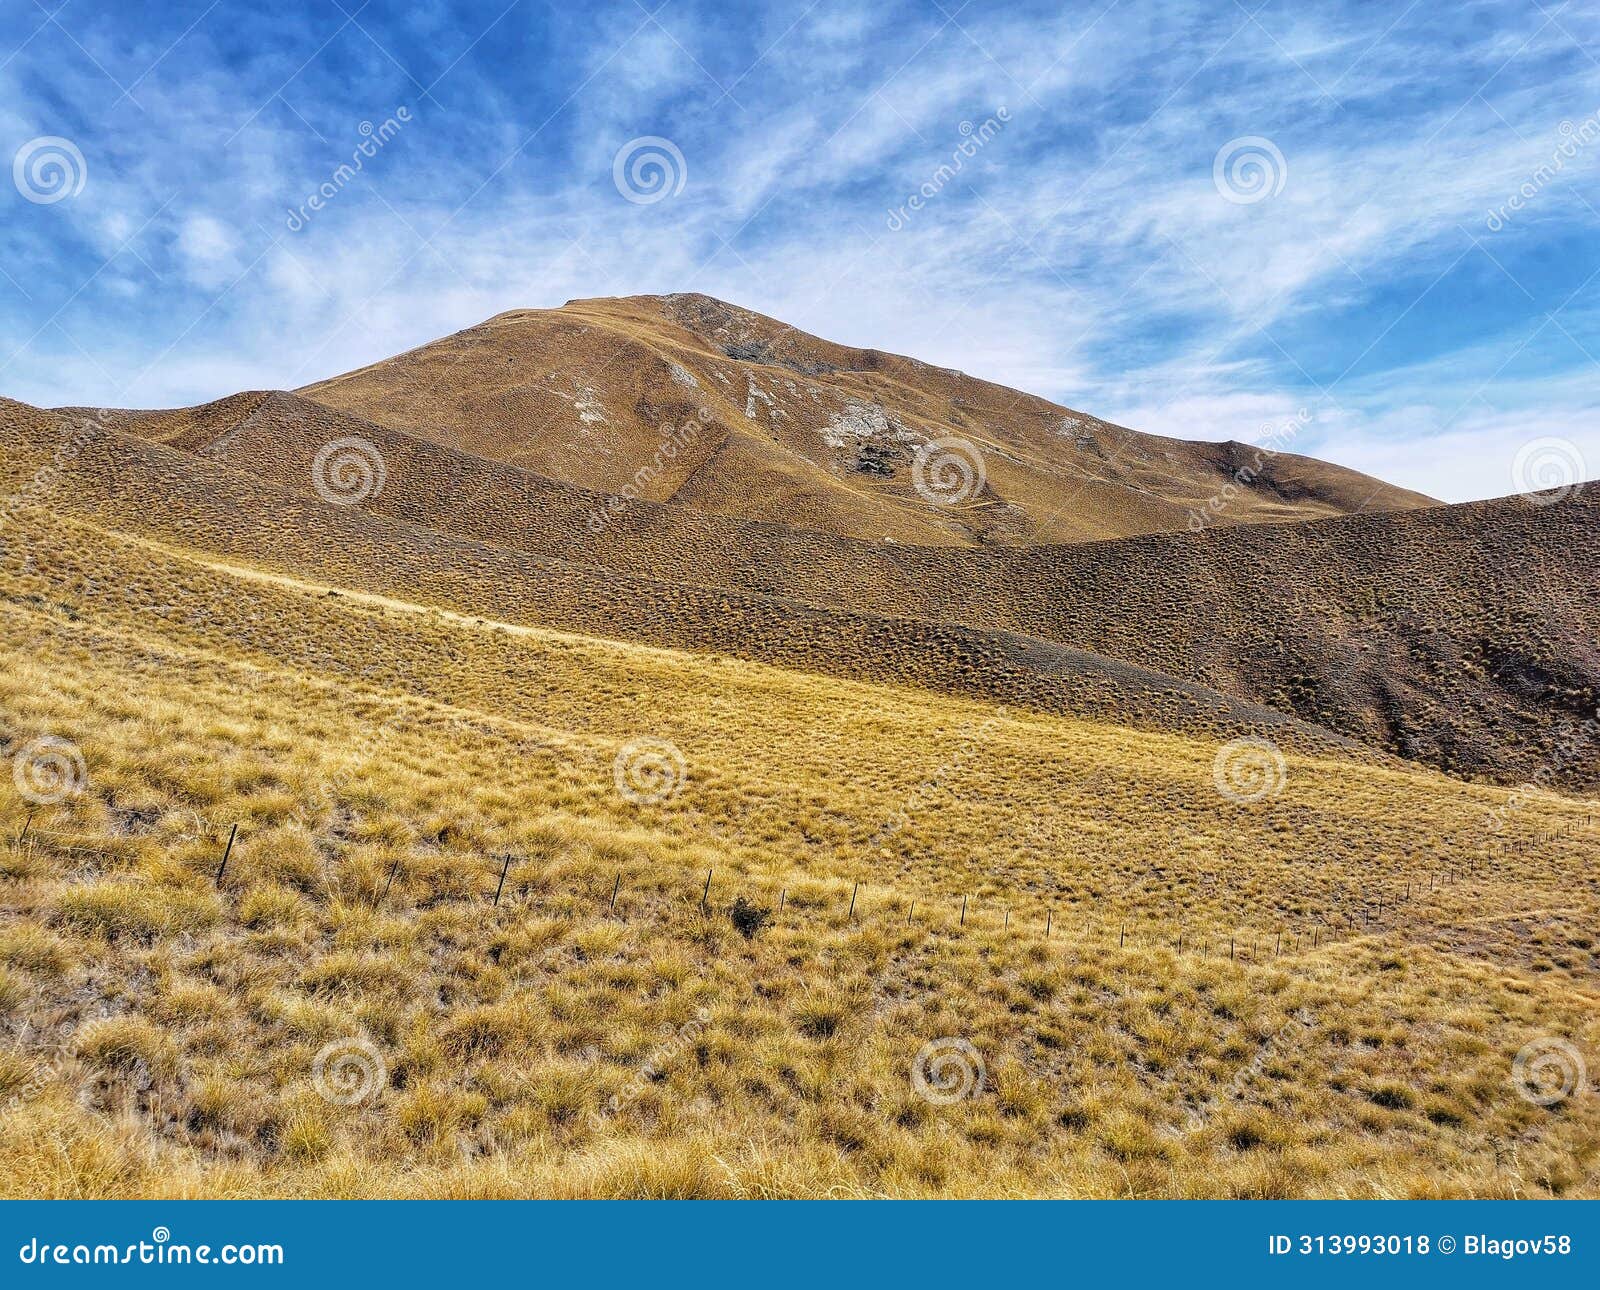 landforms of mountains at lindis pass on the south island of new zealand